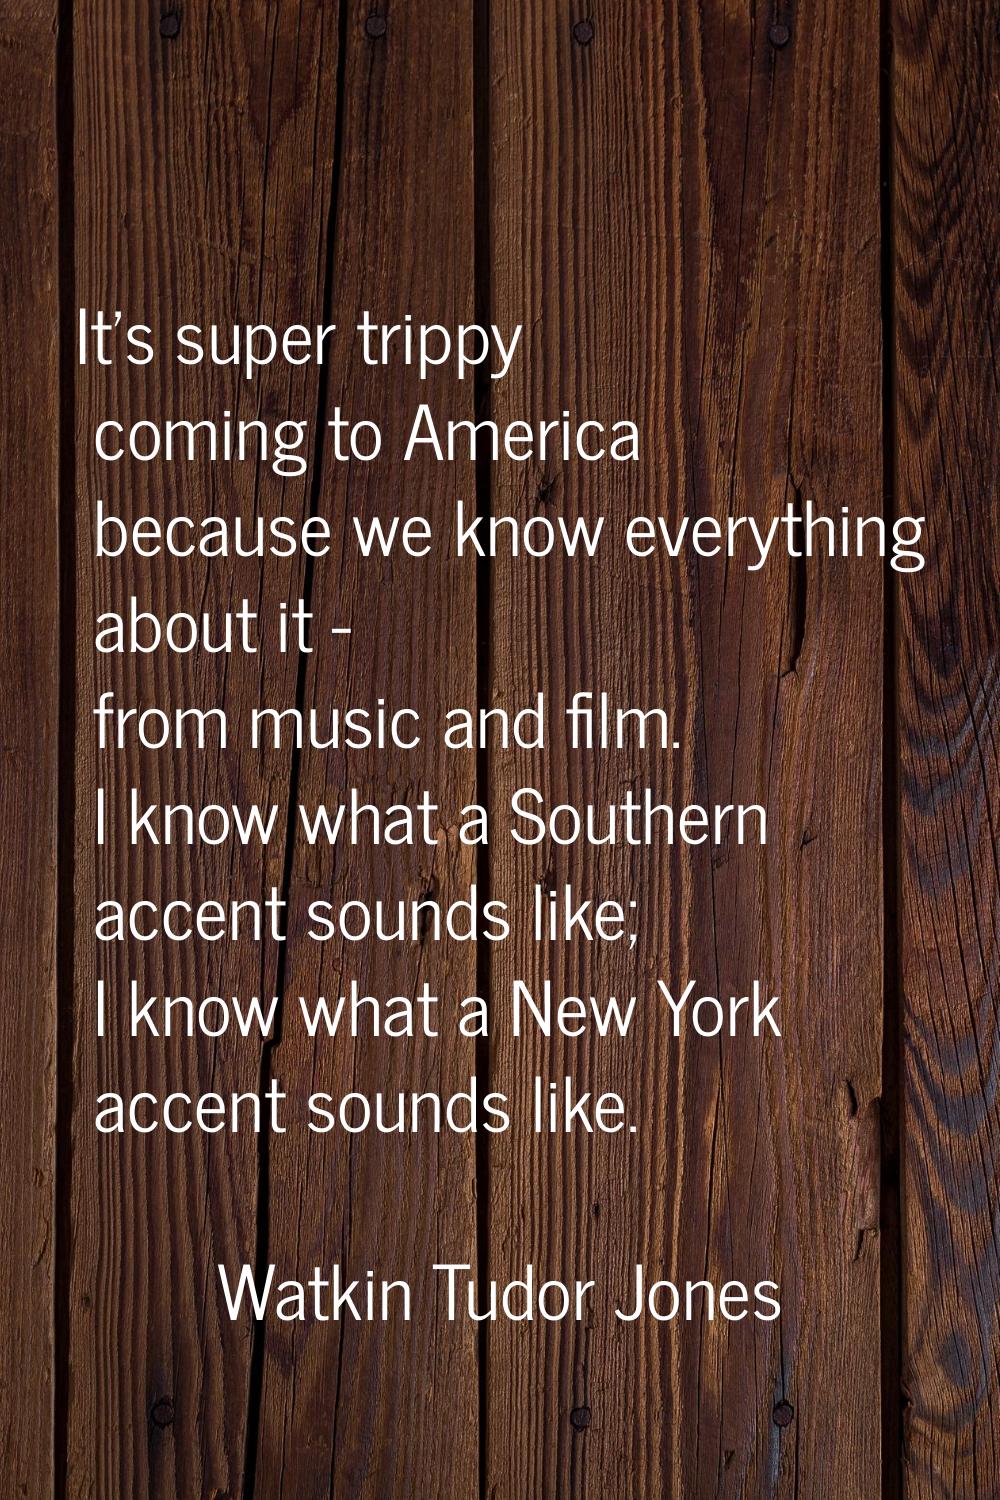 It's super trippy coming to America because we know everything about it - from music and film. I kn